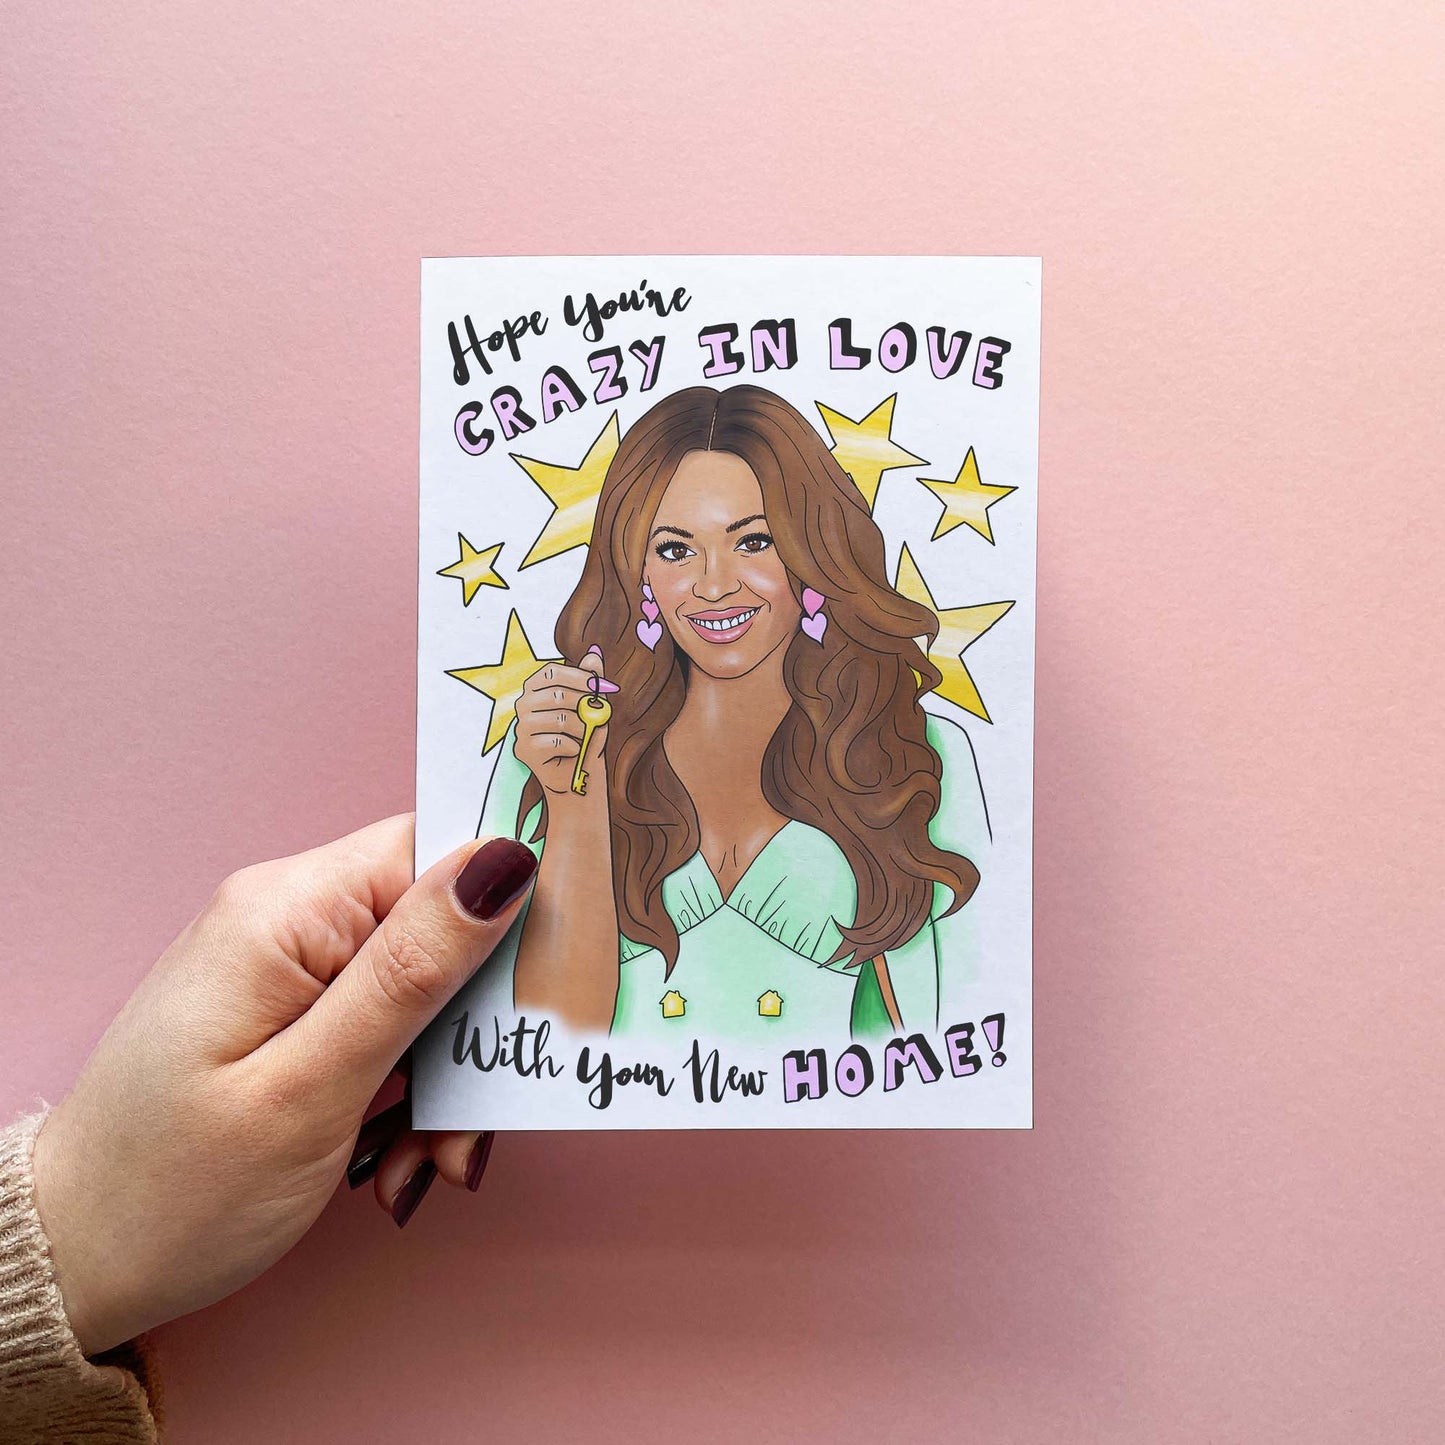 Funny new home / housewarming card reading hope you're crazy in love with your new home! Featuring an illustration resembling Beyonce holding house keys